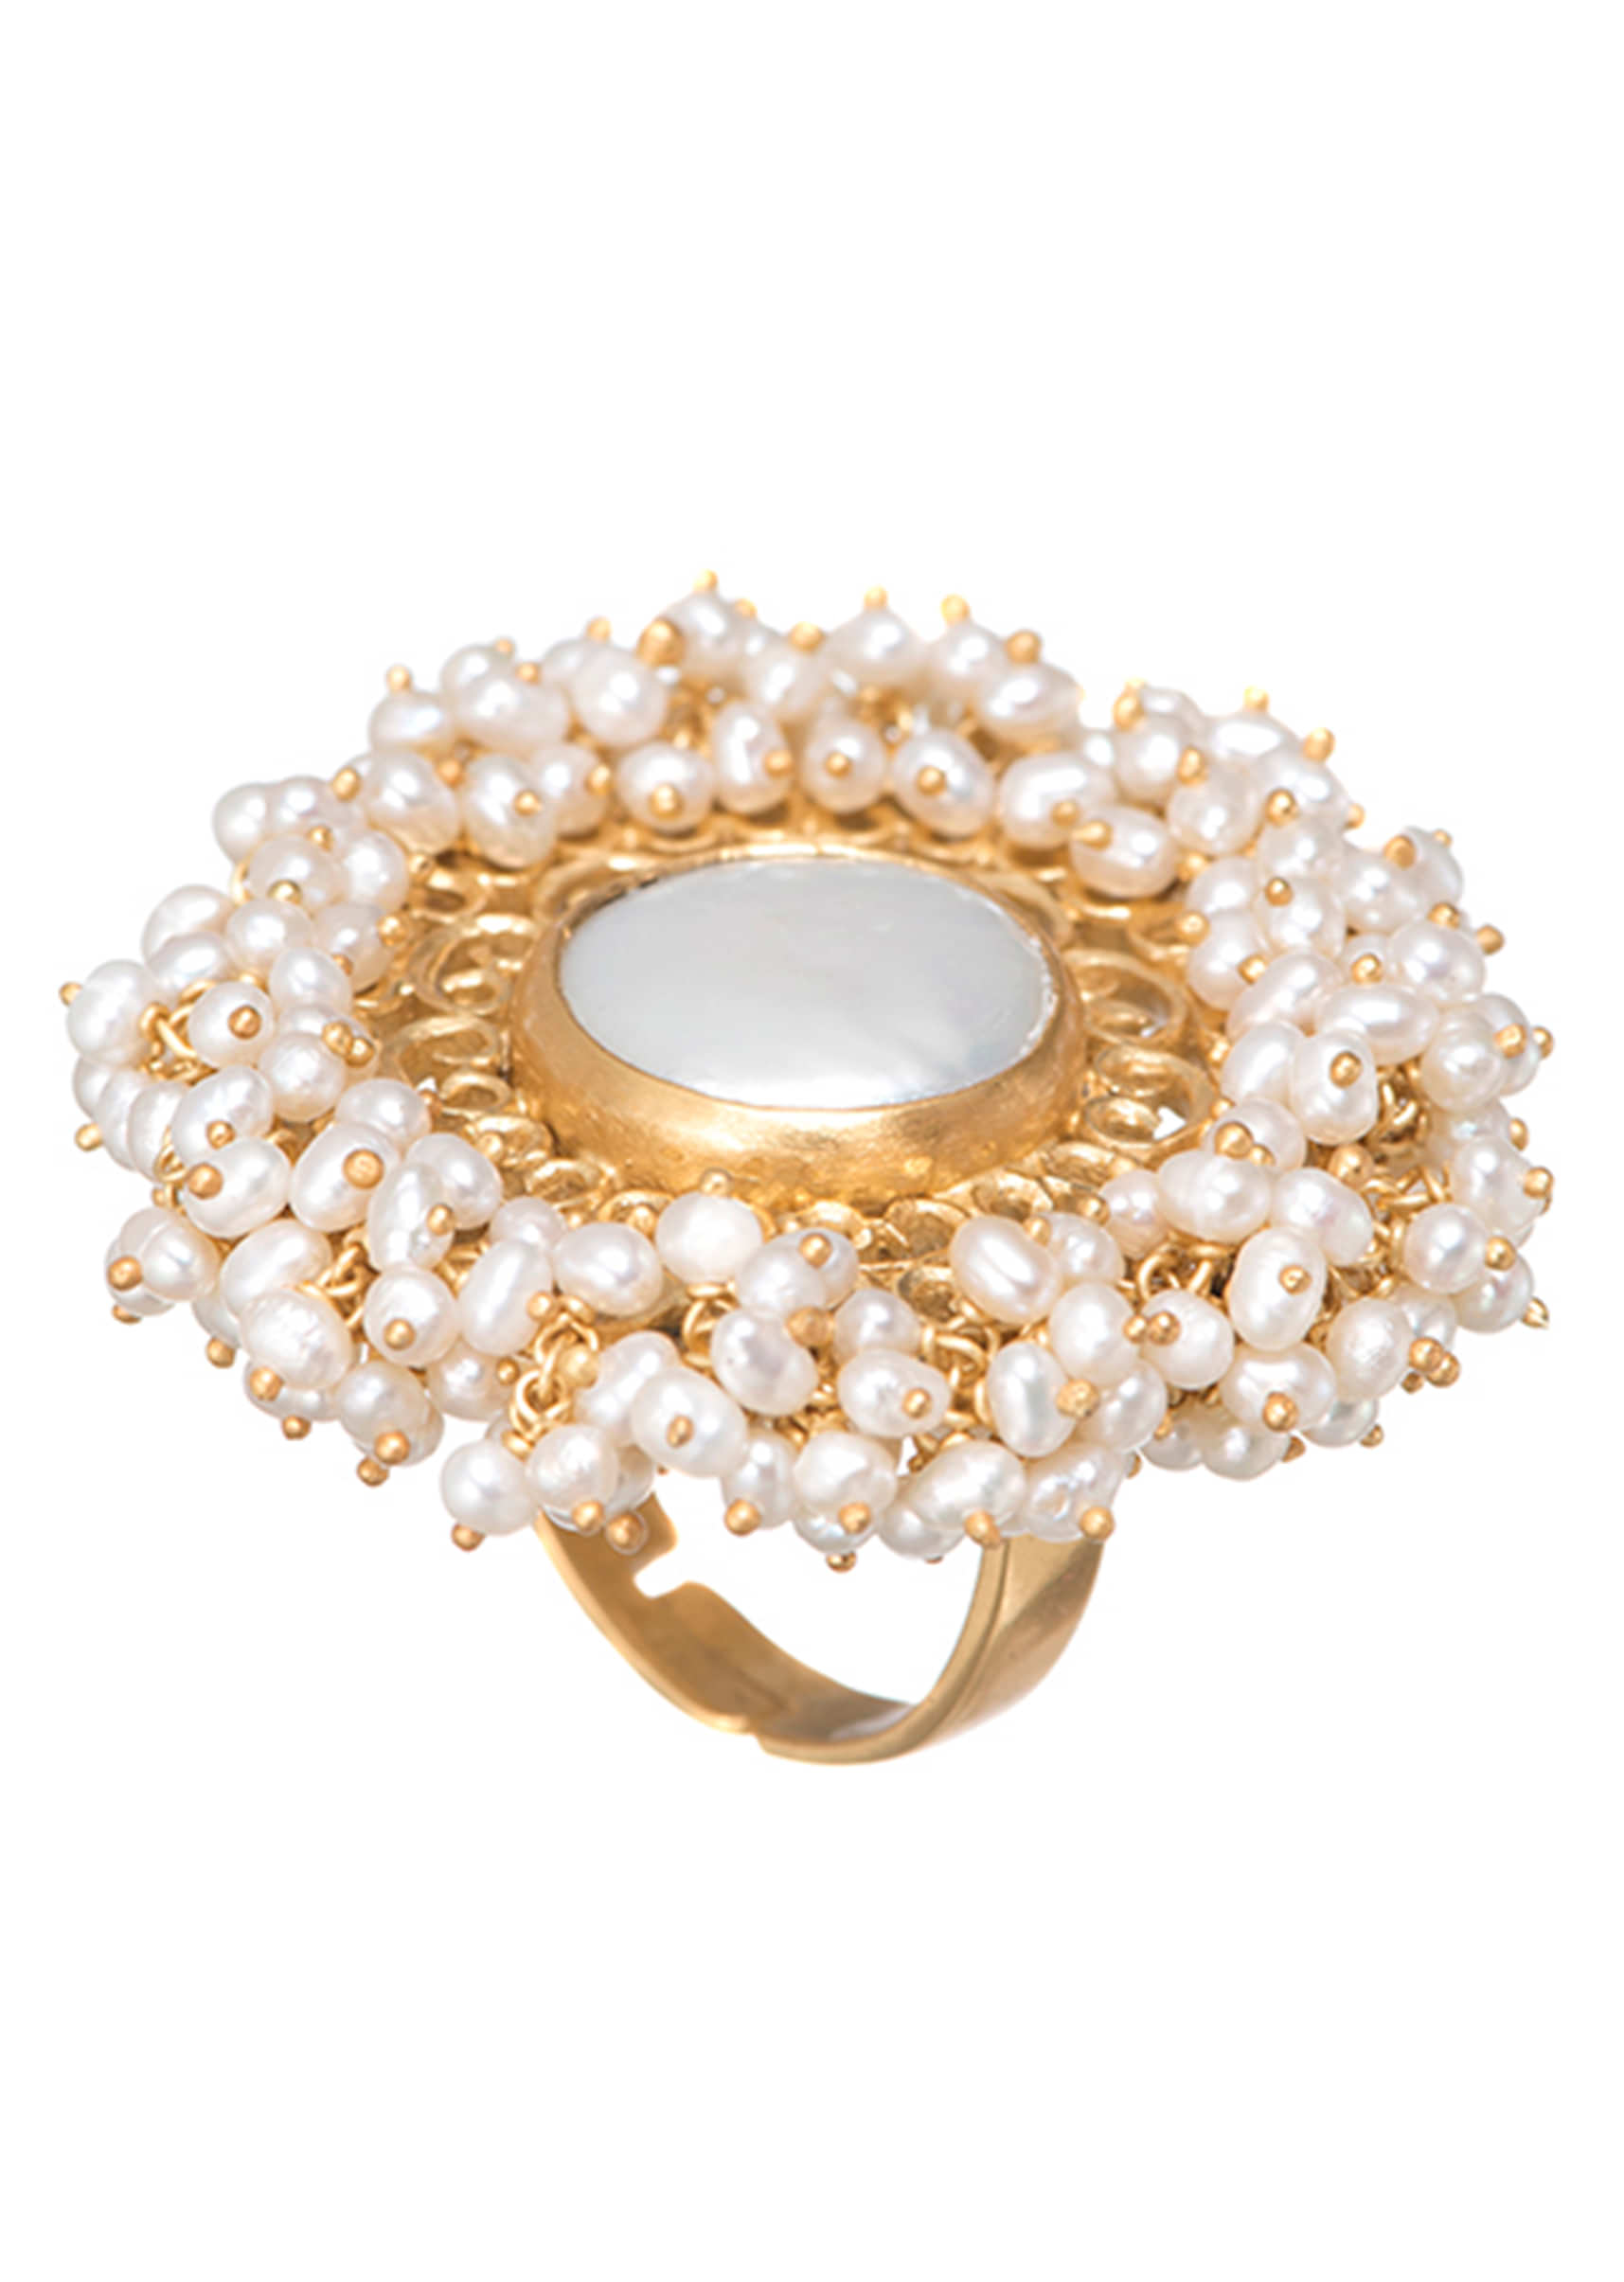 Gold Plated Chunky Ring With A Baroque Pearl Centre Lined With Tiny Pearl Beads By Zariin